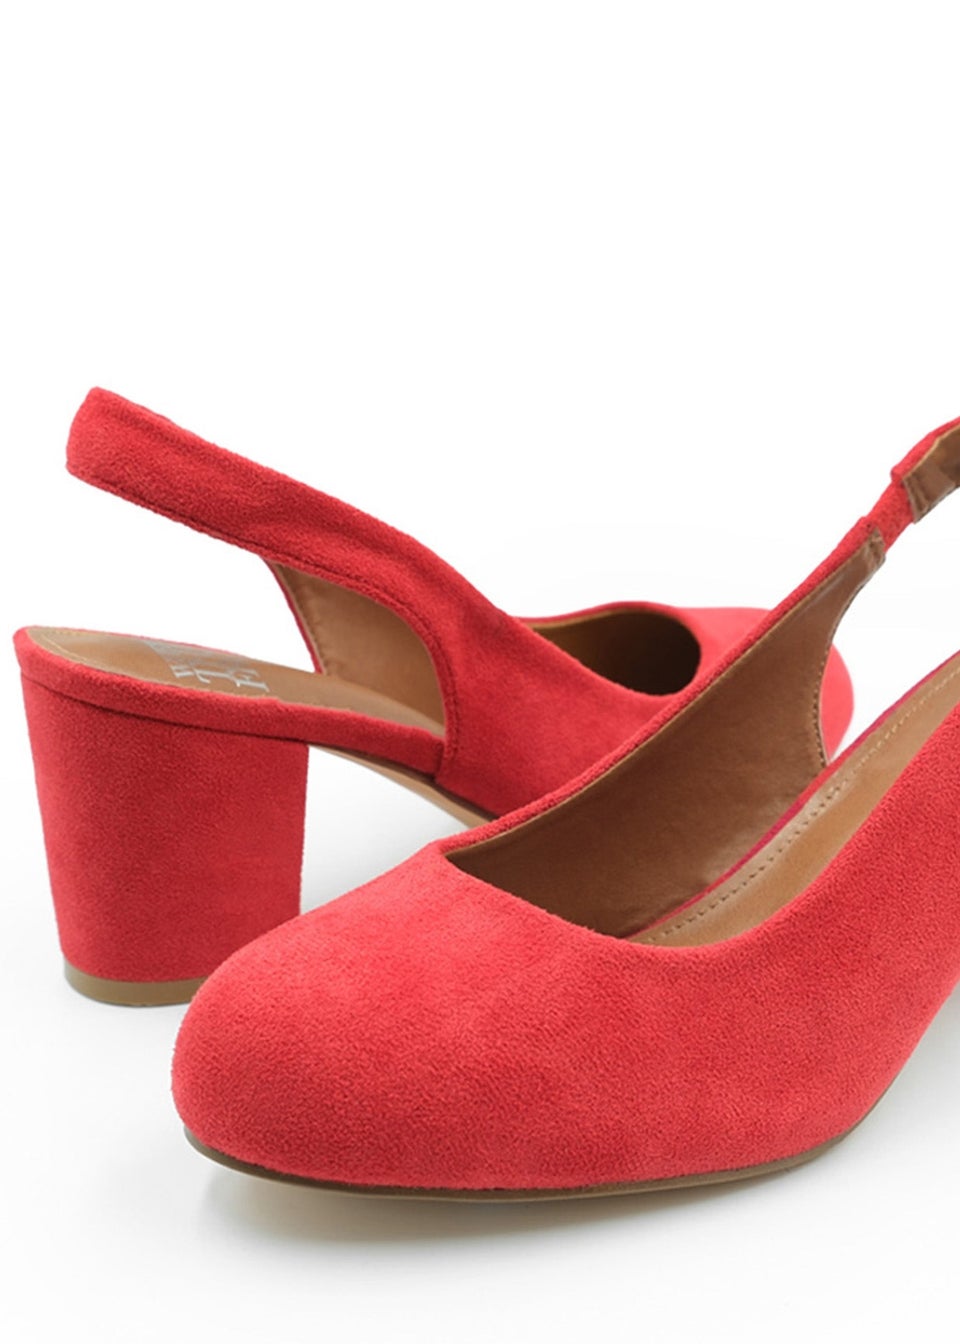 Where's That From Red Edith Wide Fit Suede Block Heels